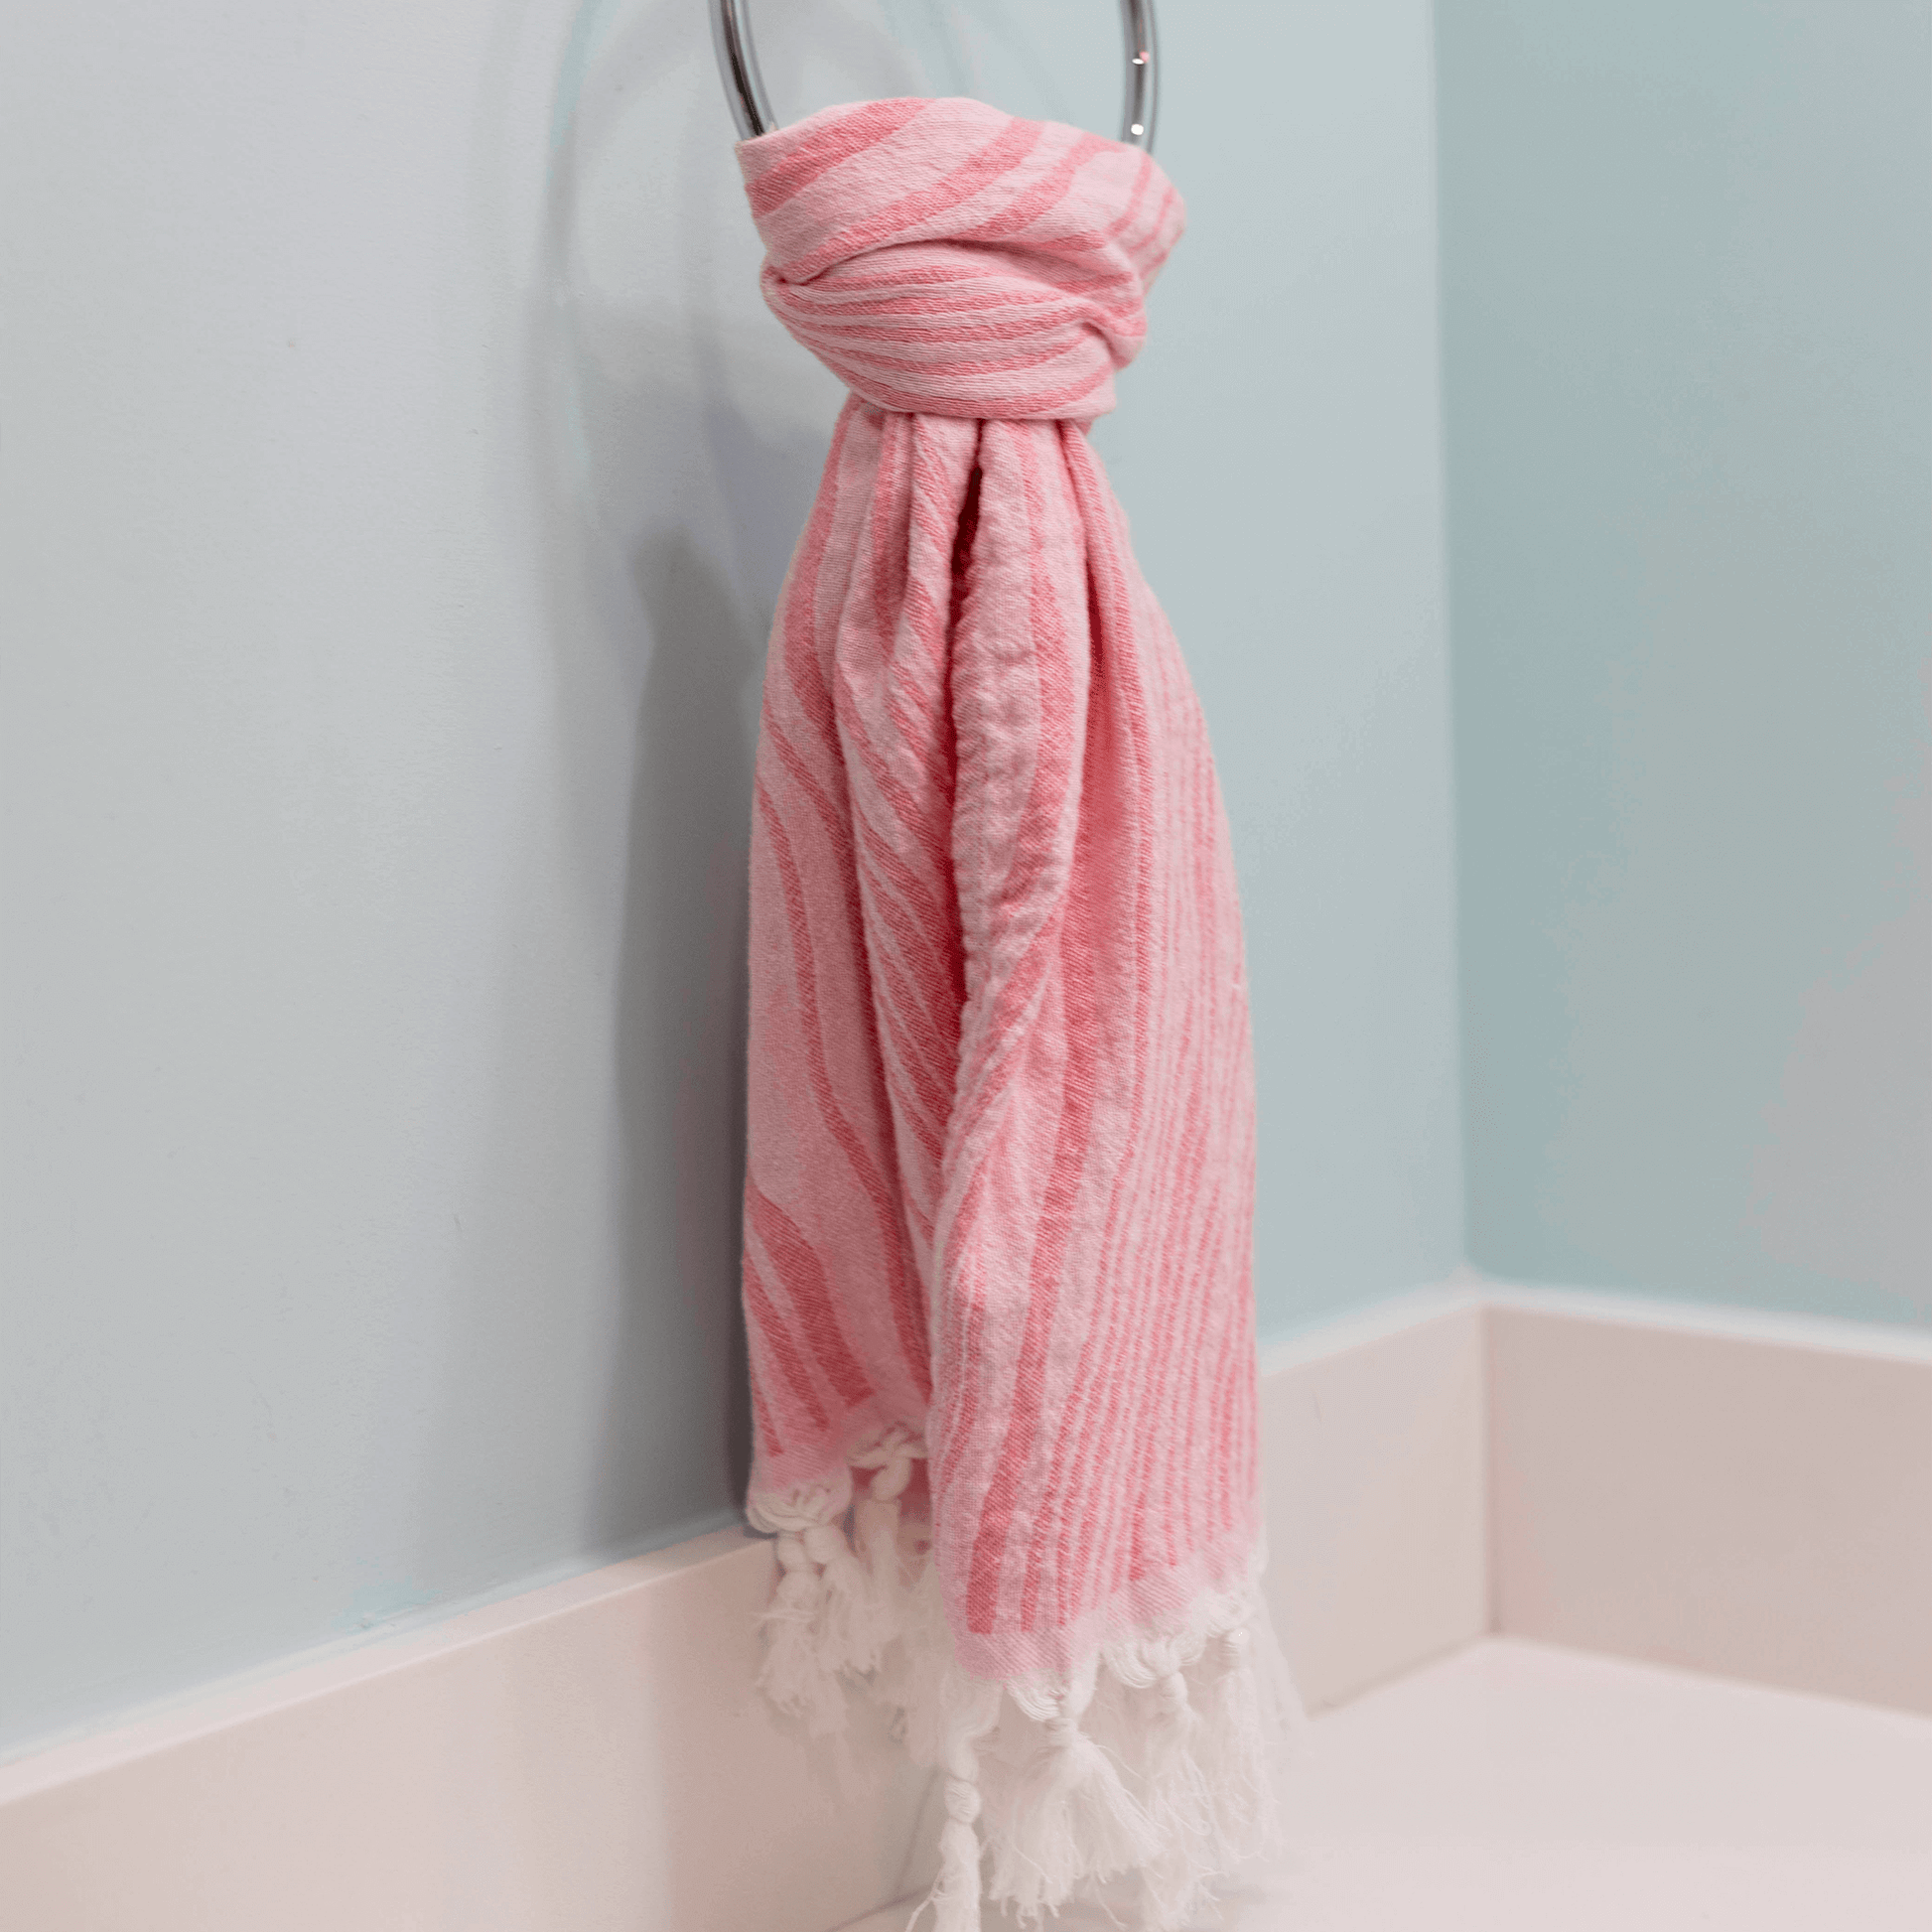 Pink Turkish hand towel hanging in the bath as a hand towel